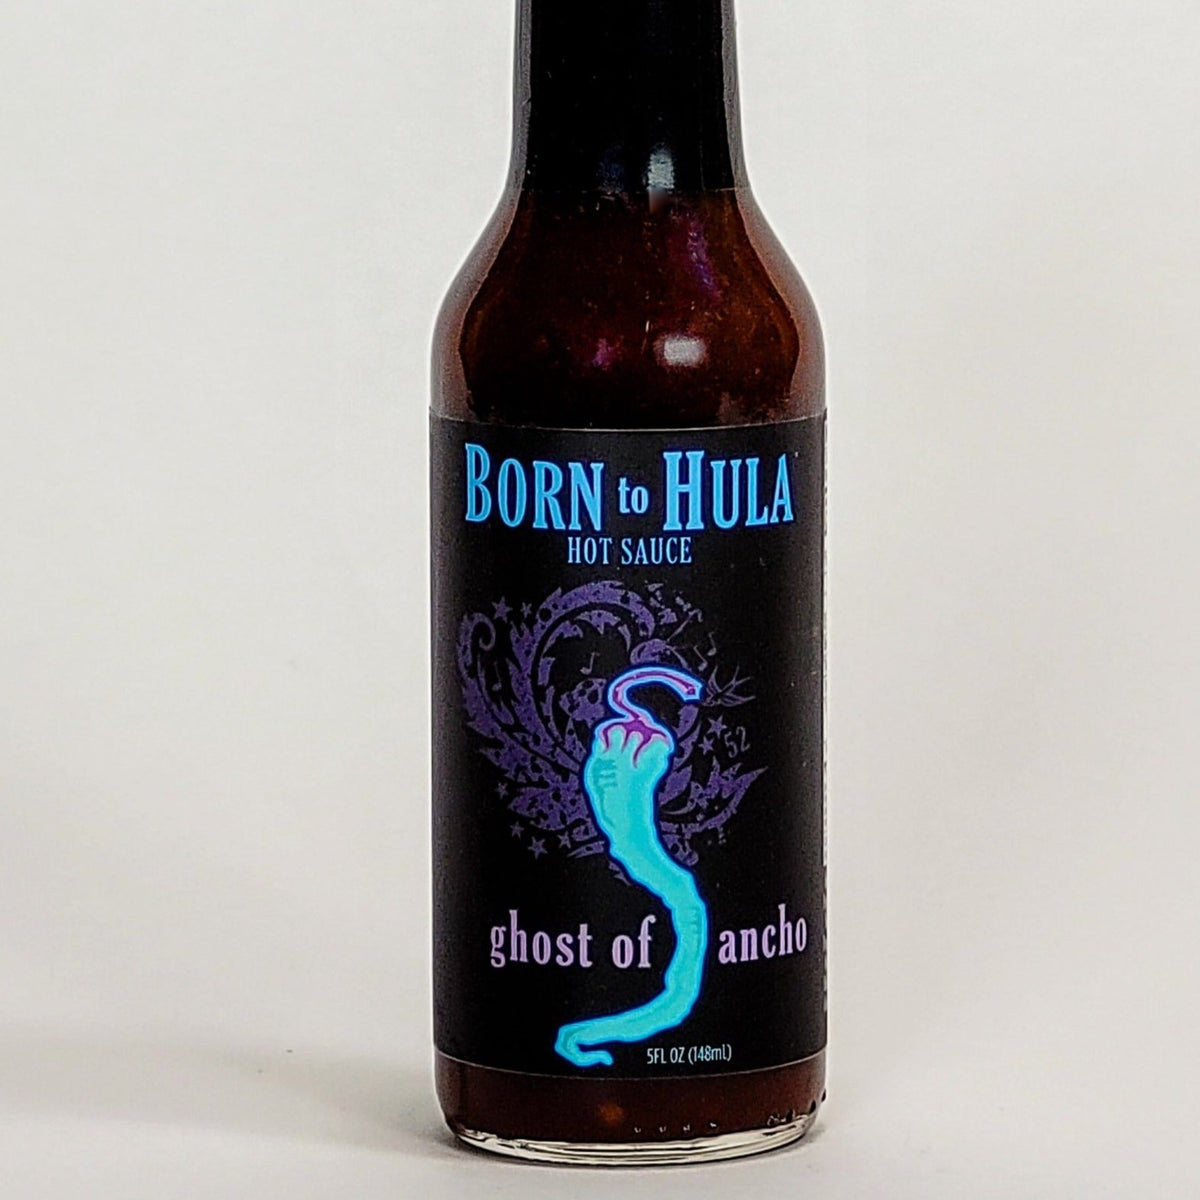 Born to Hula ghost of ancho label